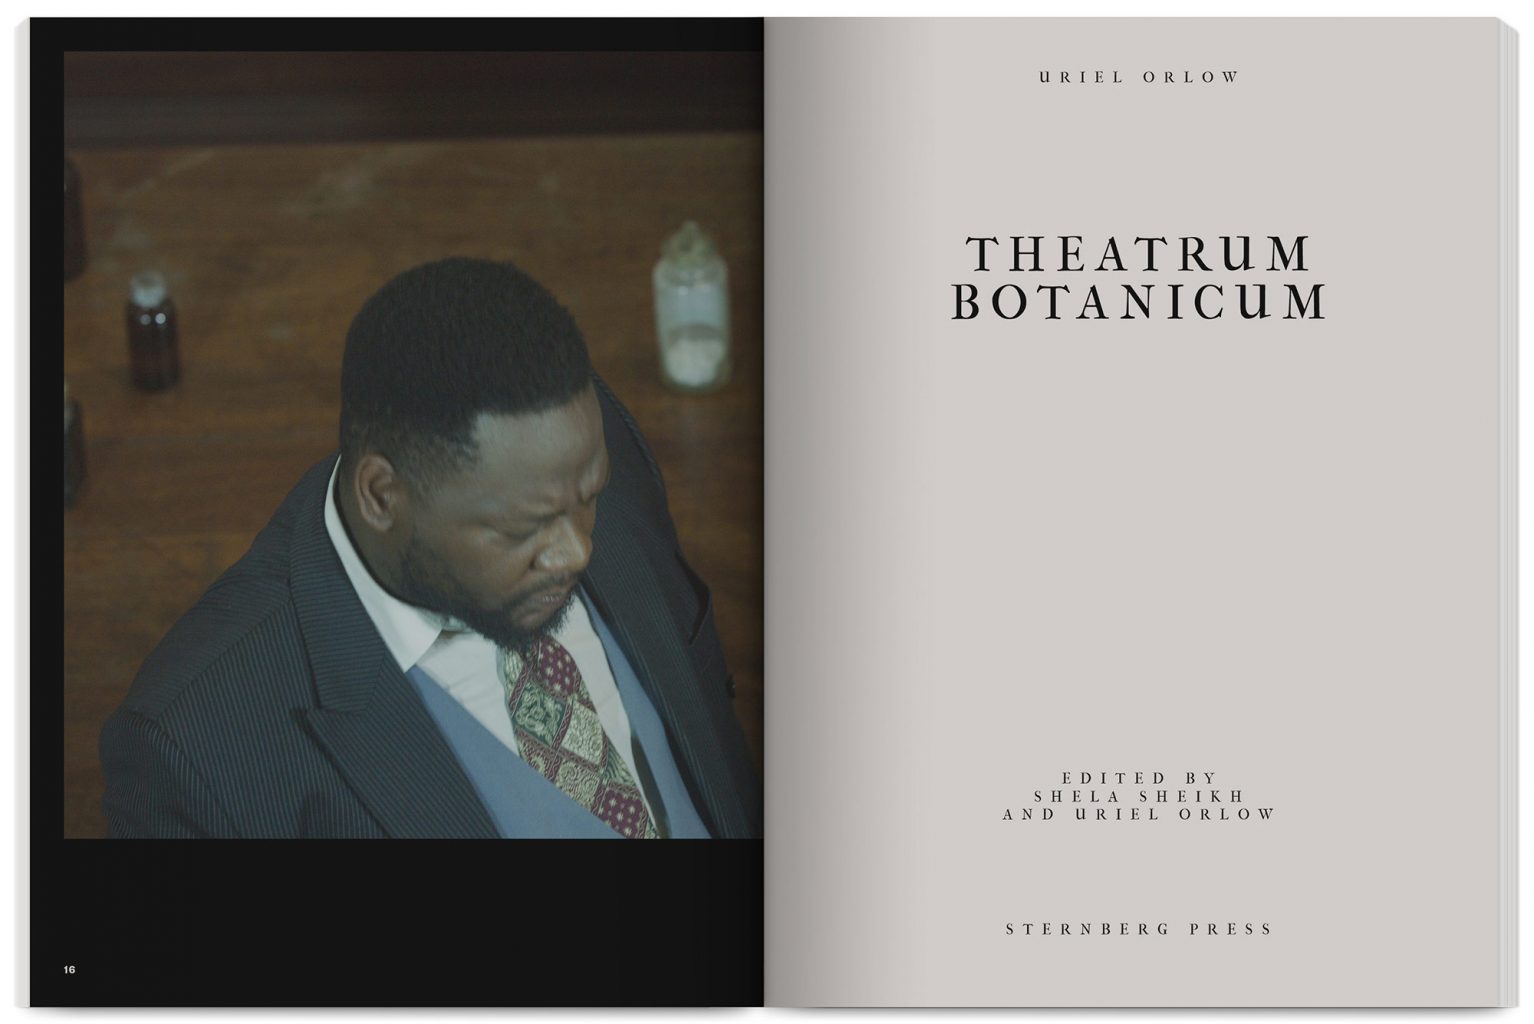 Publication Theatrum Botanicum edited by Uriel Orlow, Shela Sheikh, published by Sternberg Press, with The Showroom Gallery, designed by In the shade of a tree studio, founded by Sophie Demay and Maël Fournier Comte.